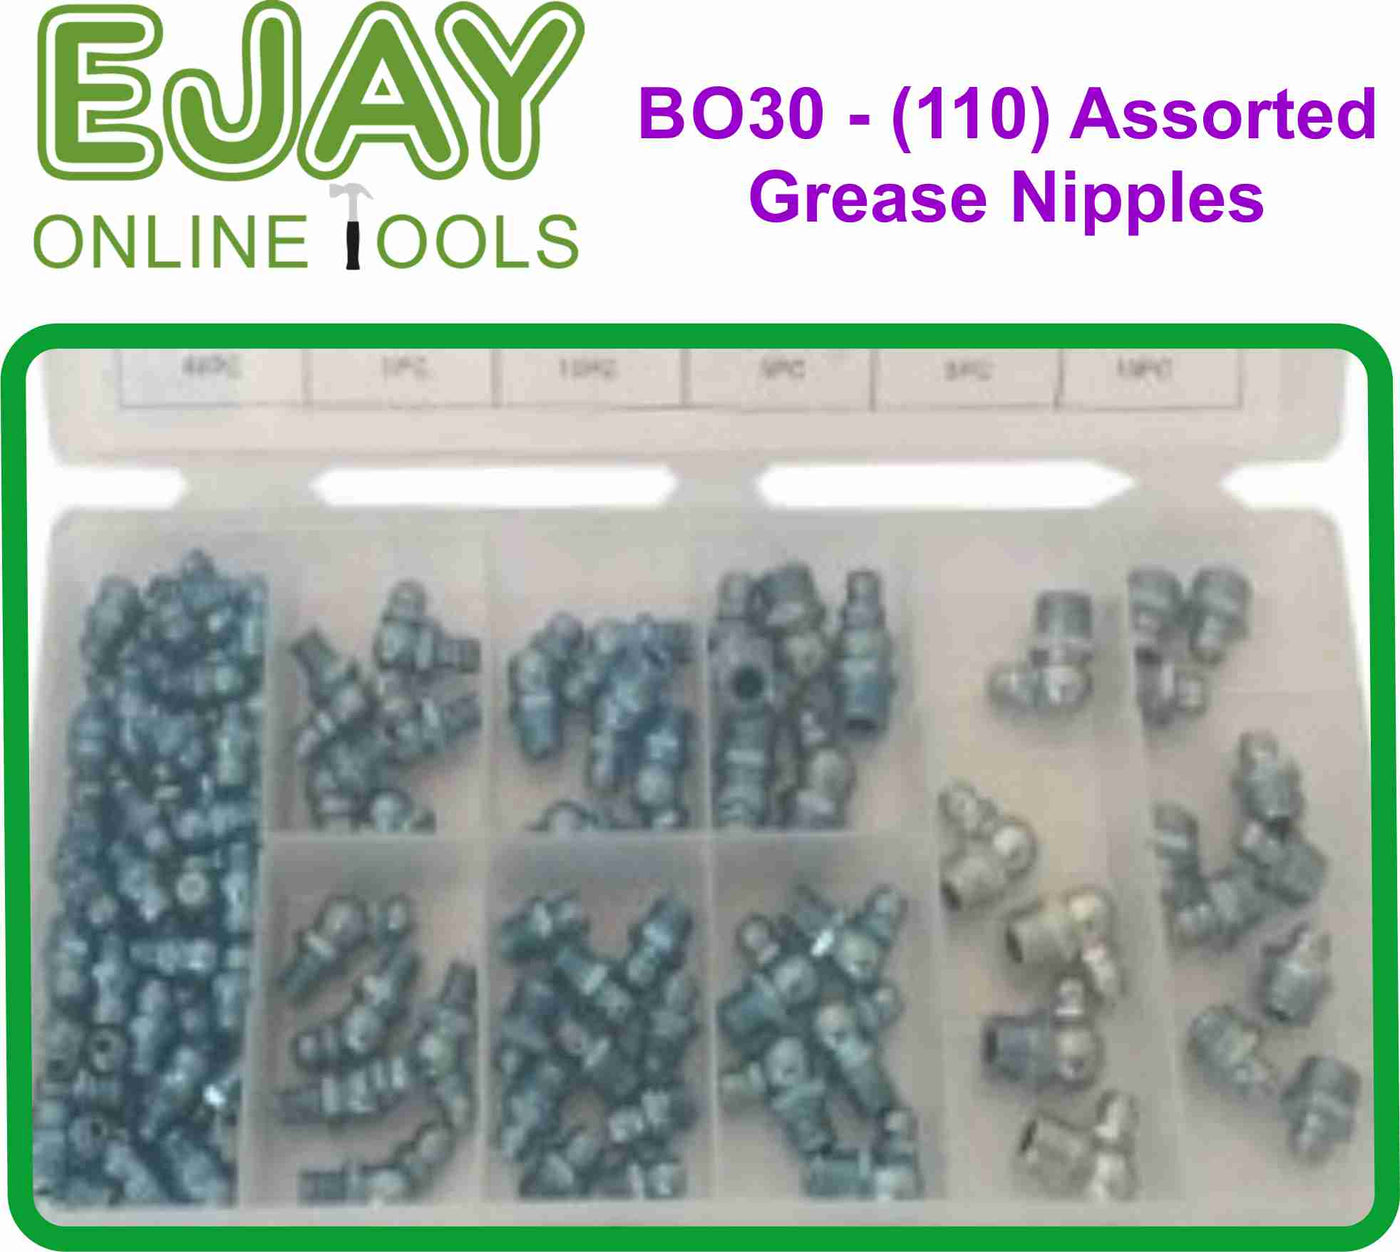 Assorted Grease Nipples (110pc)